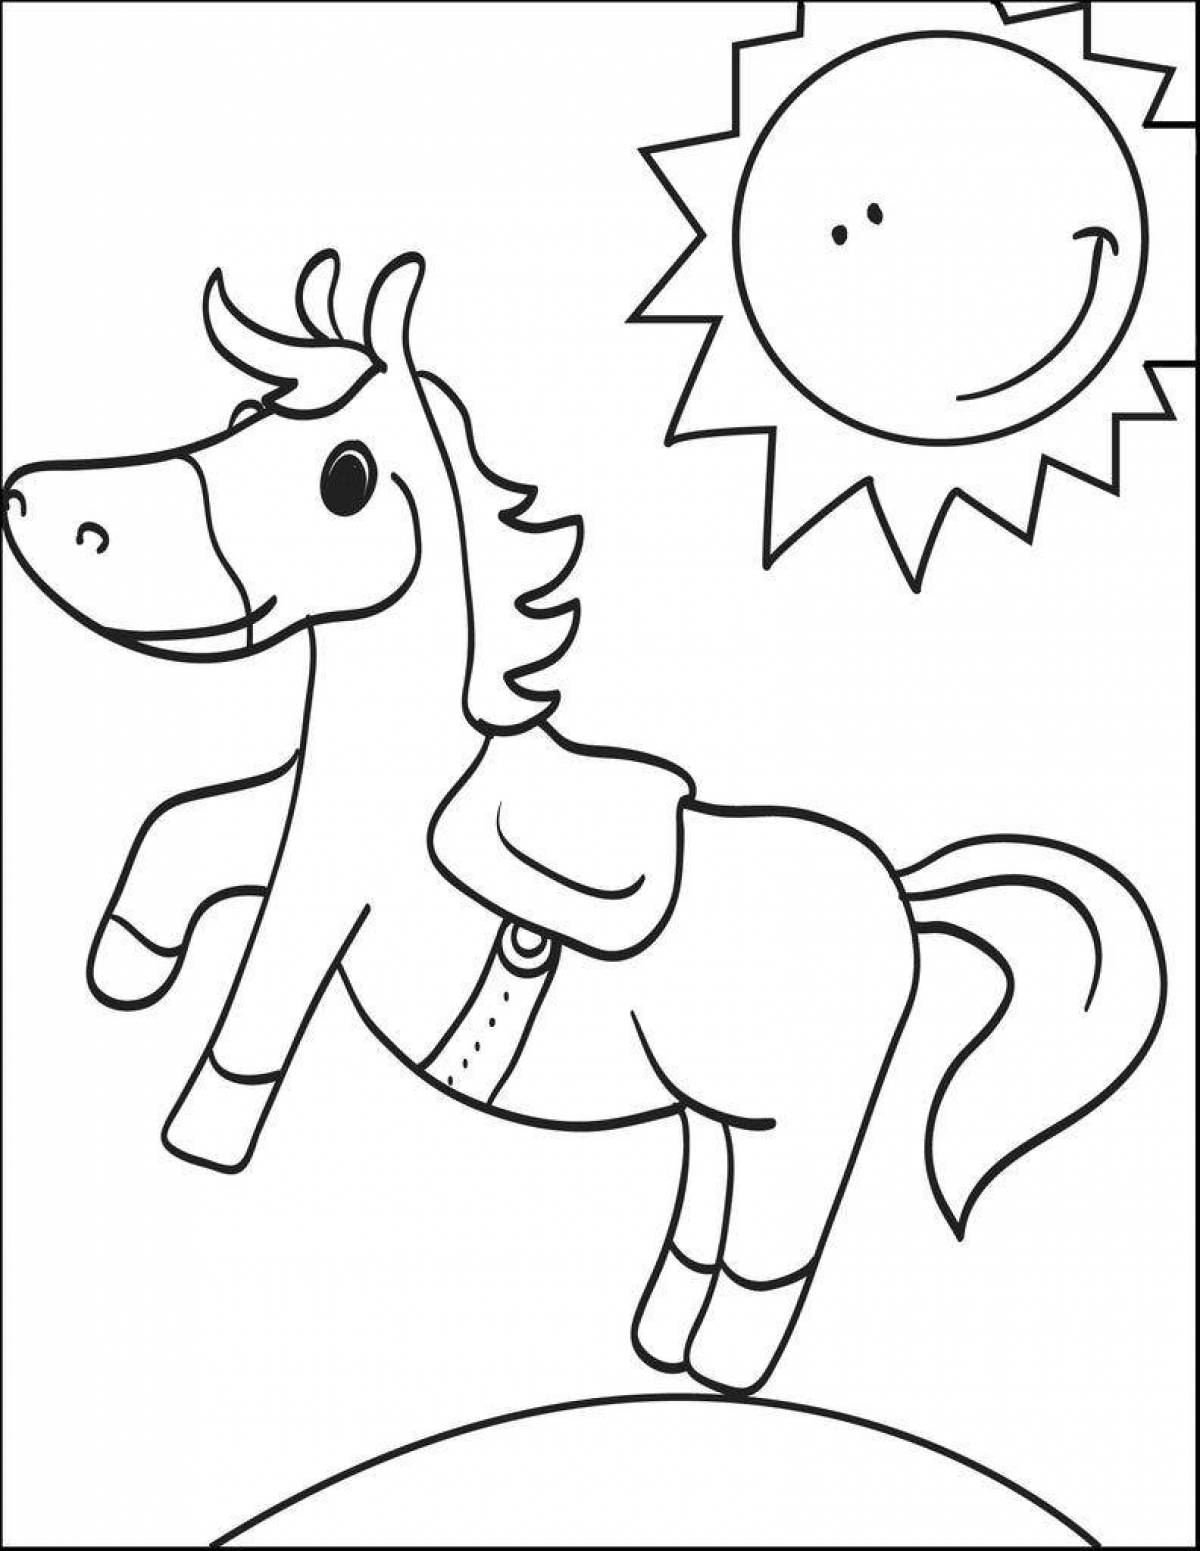 Joyful coloring horse for children 5-6 years old